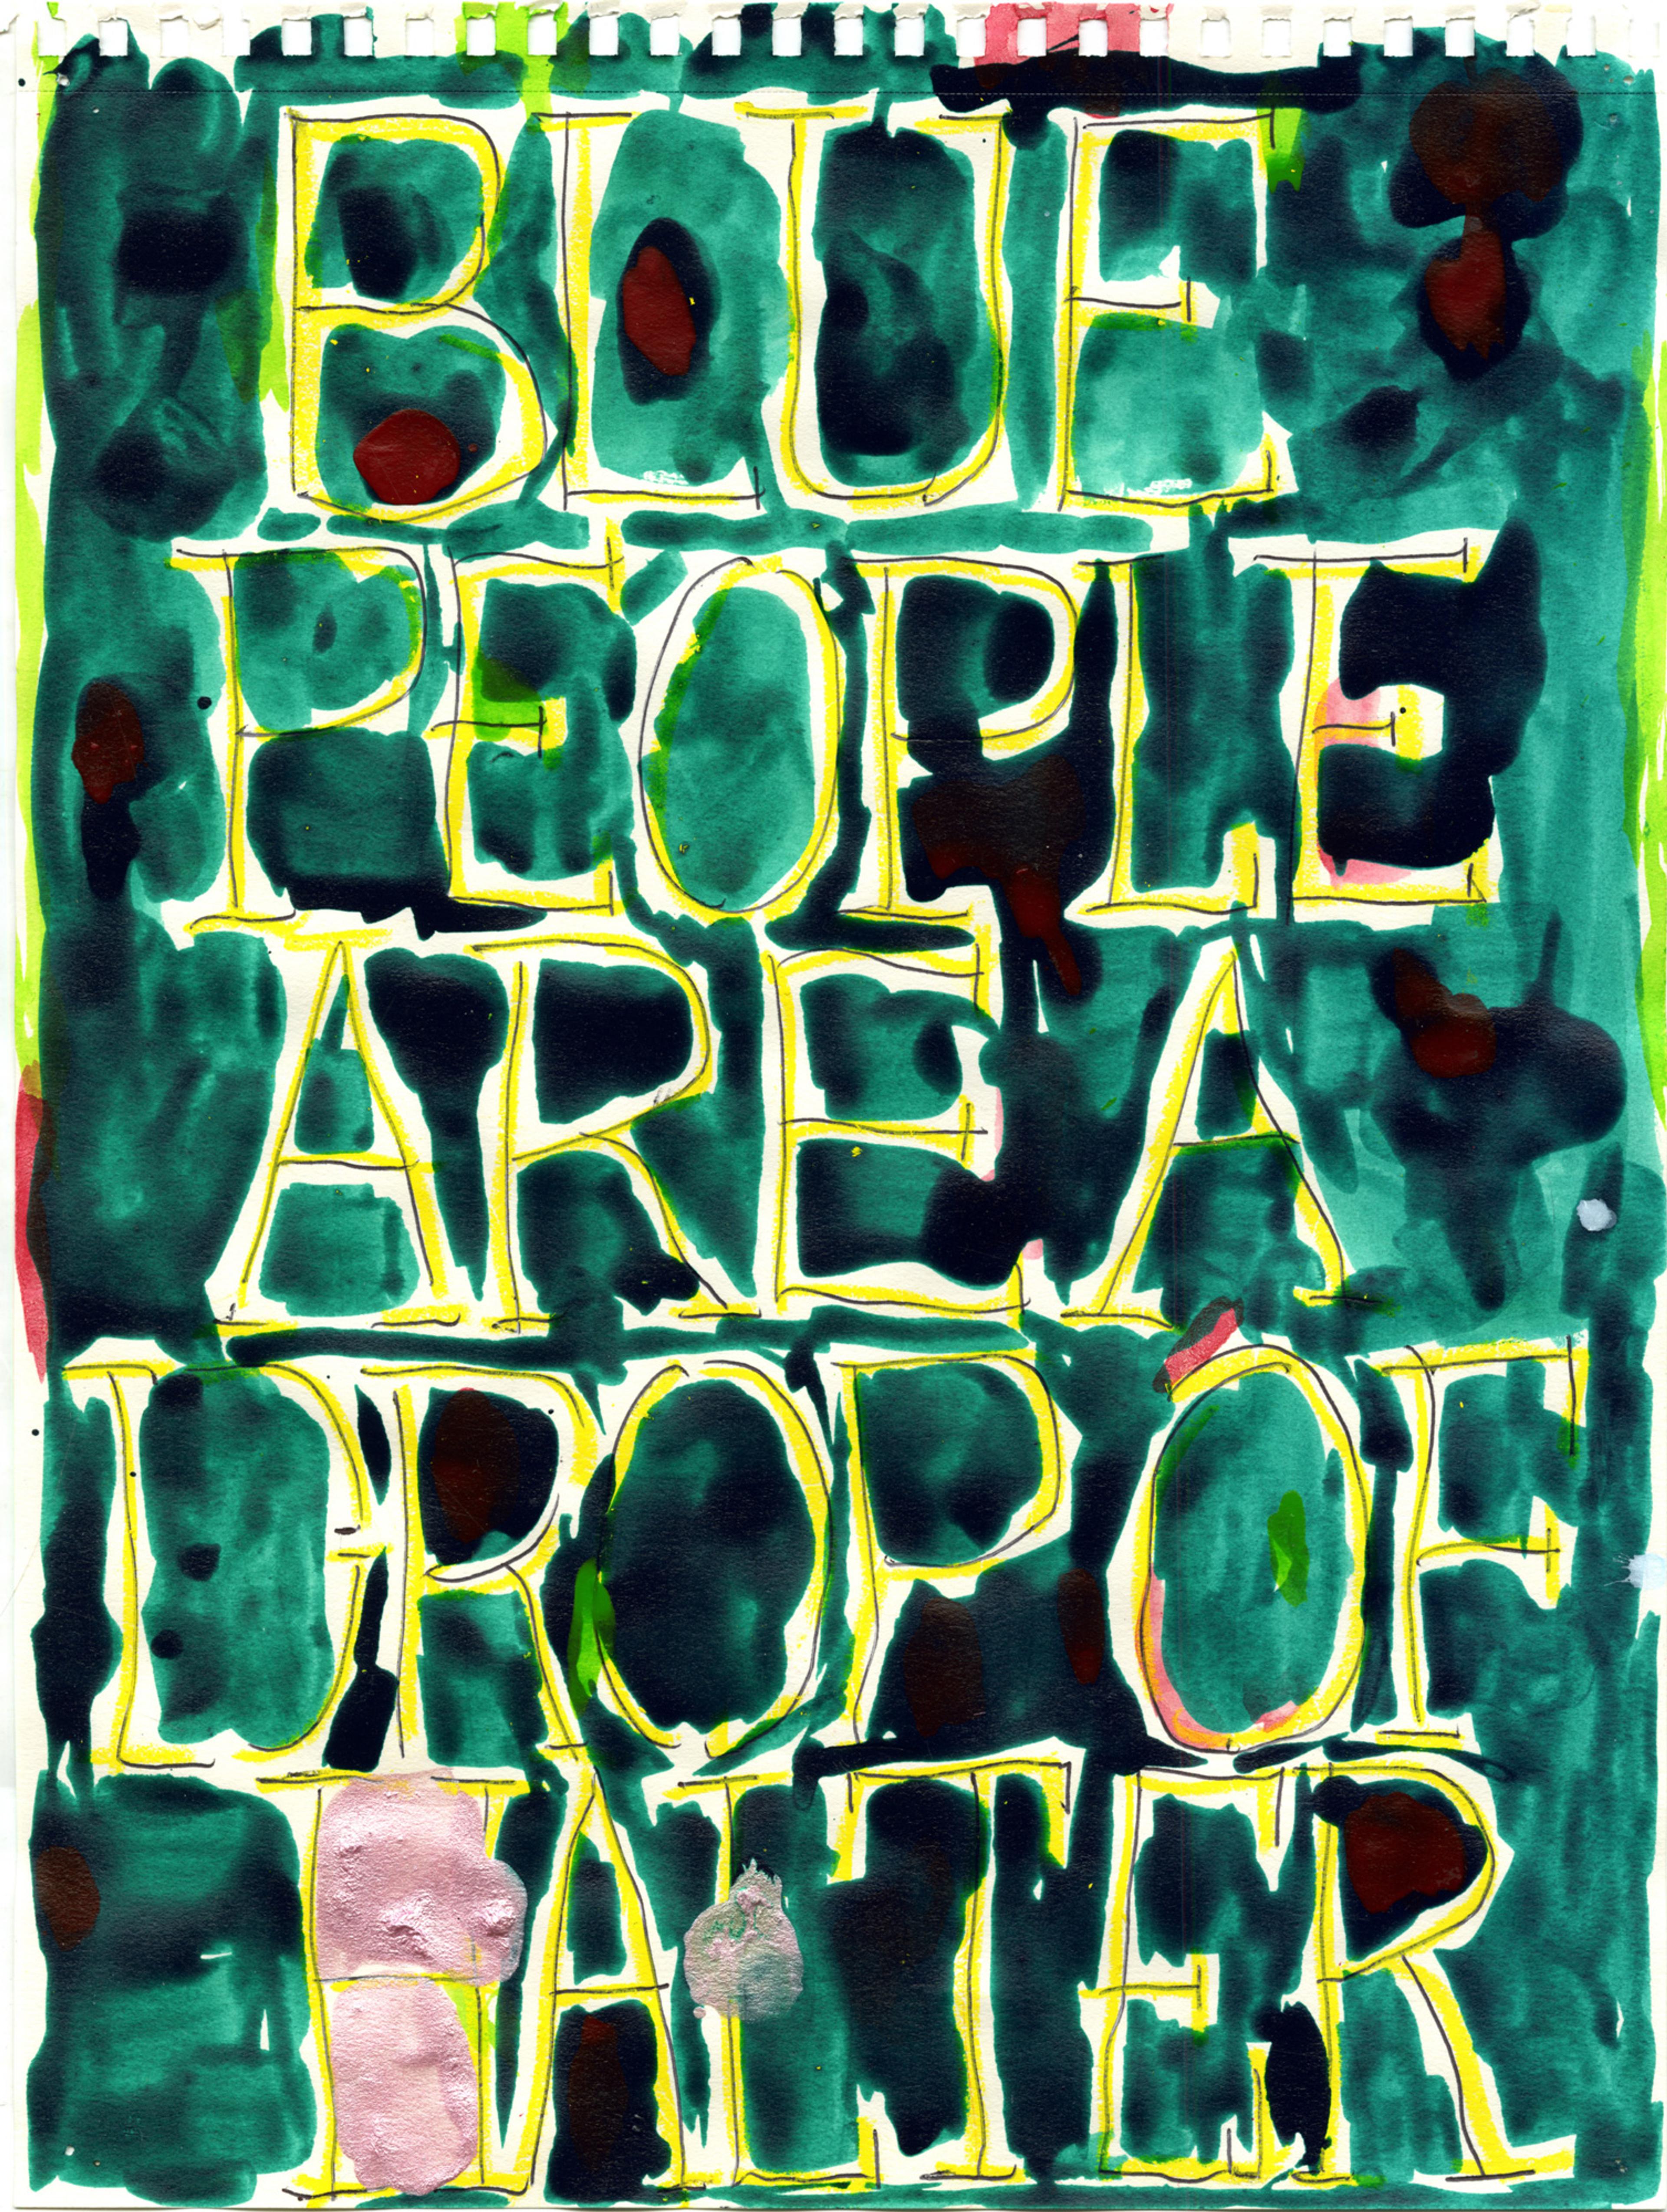 Blue People Are A Drop Of Halter, 2012